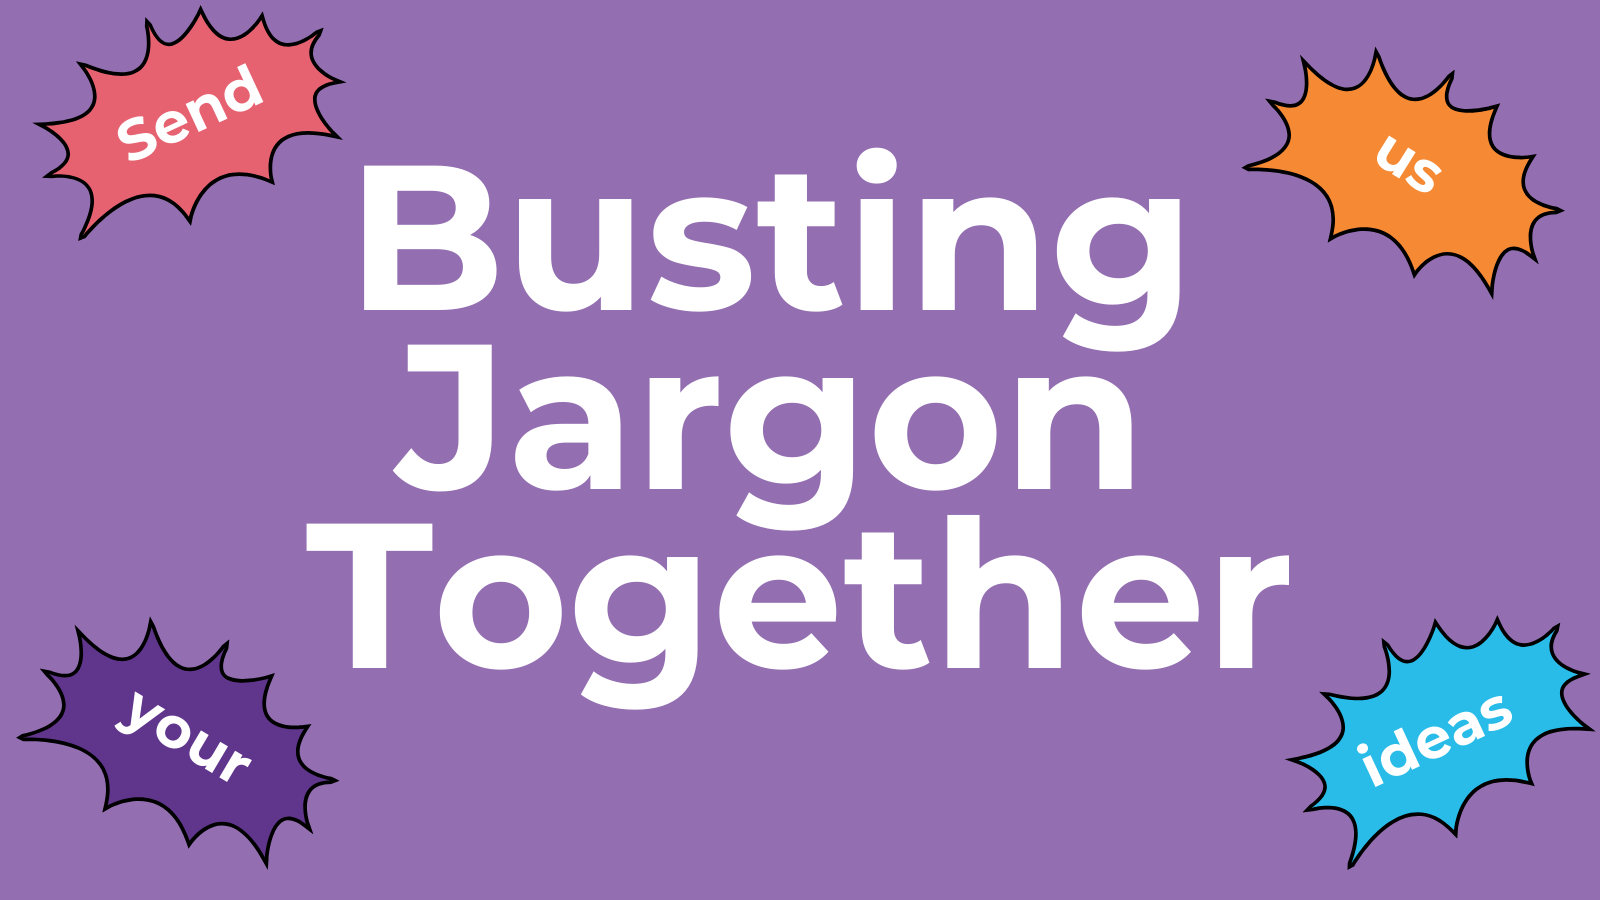 Text on a purple background saying 'Busting Jargon Together'